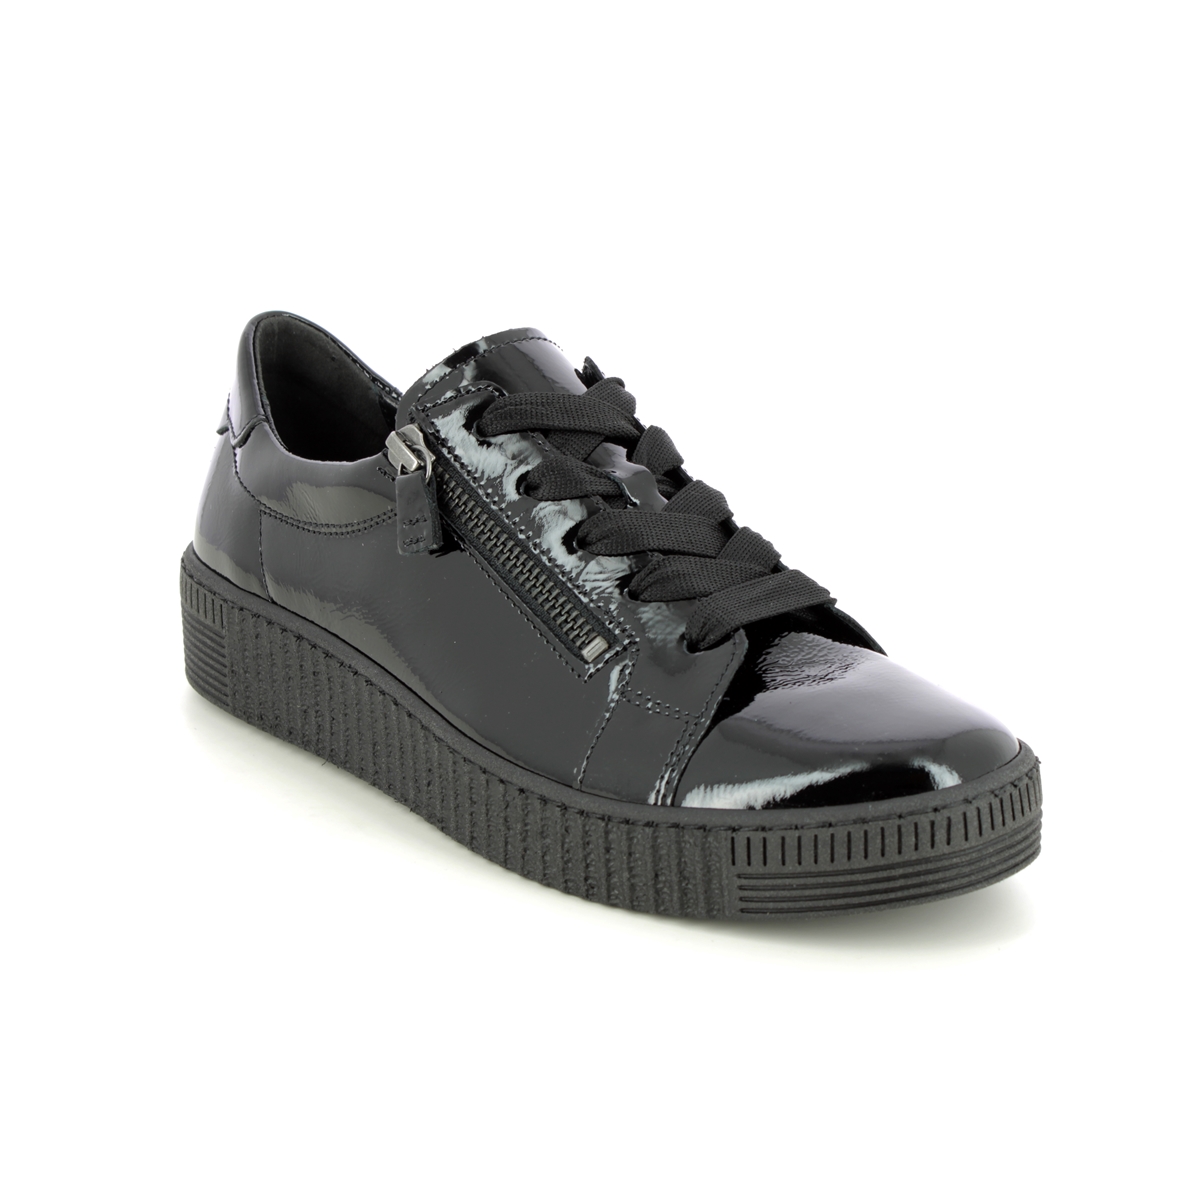 Gabor Wisdom Black Patent Womens Trainers 93.334.97 In Size 8 In Plain Black Patent  Womens Trainers In Soft Black Patent Leather